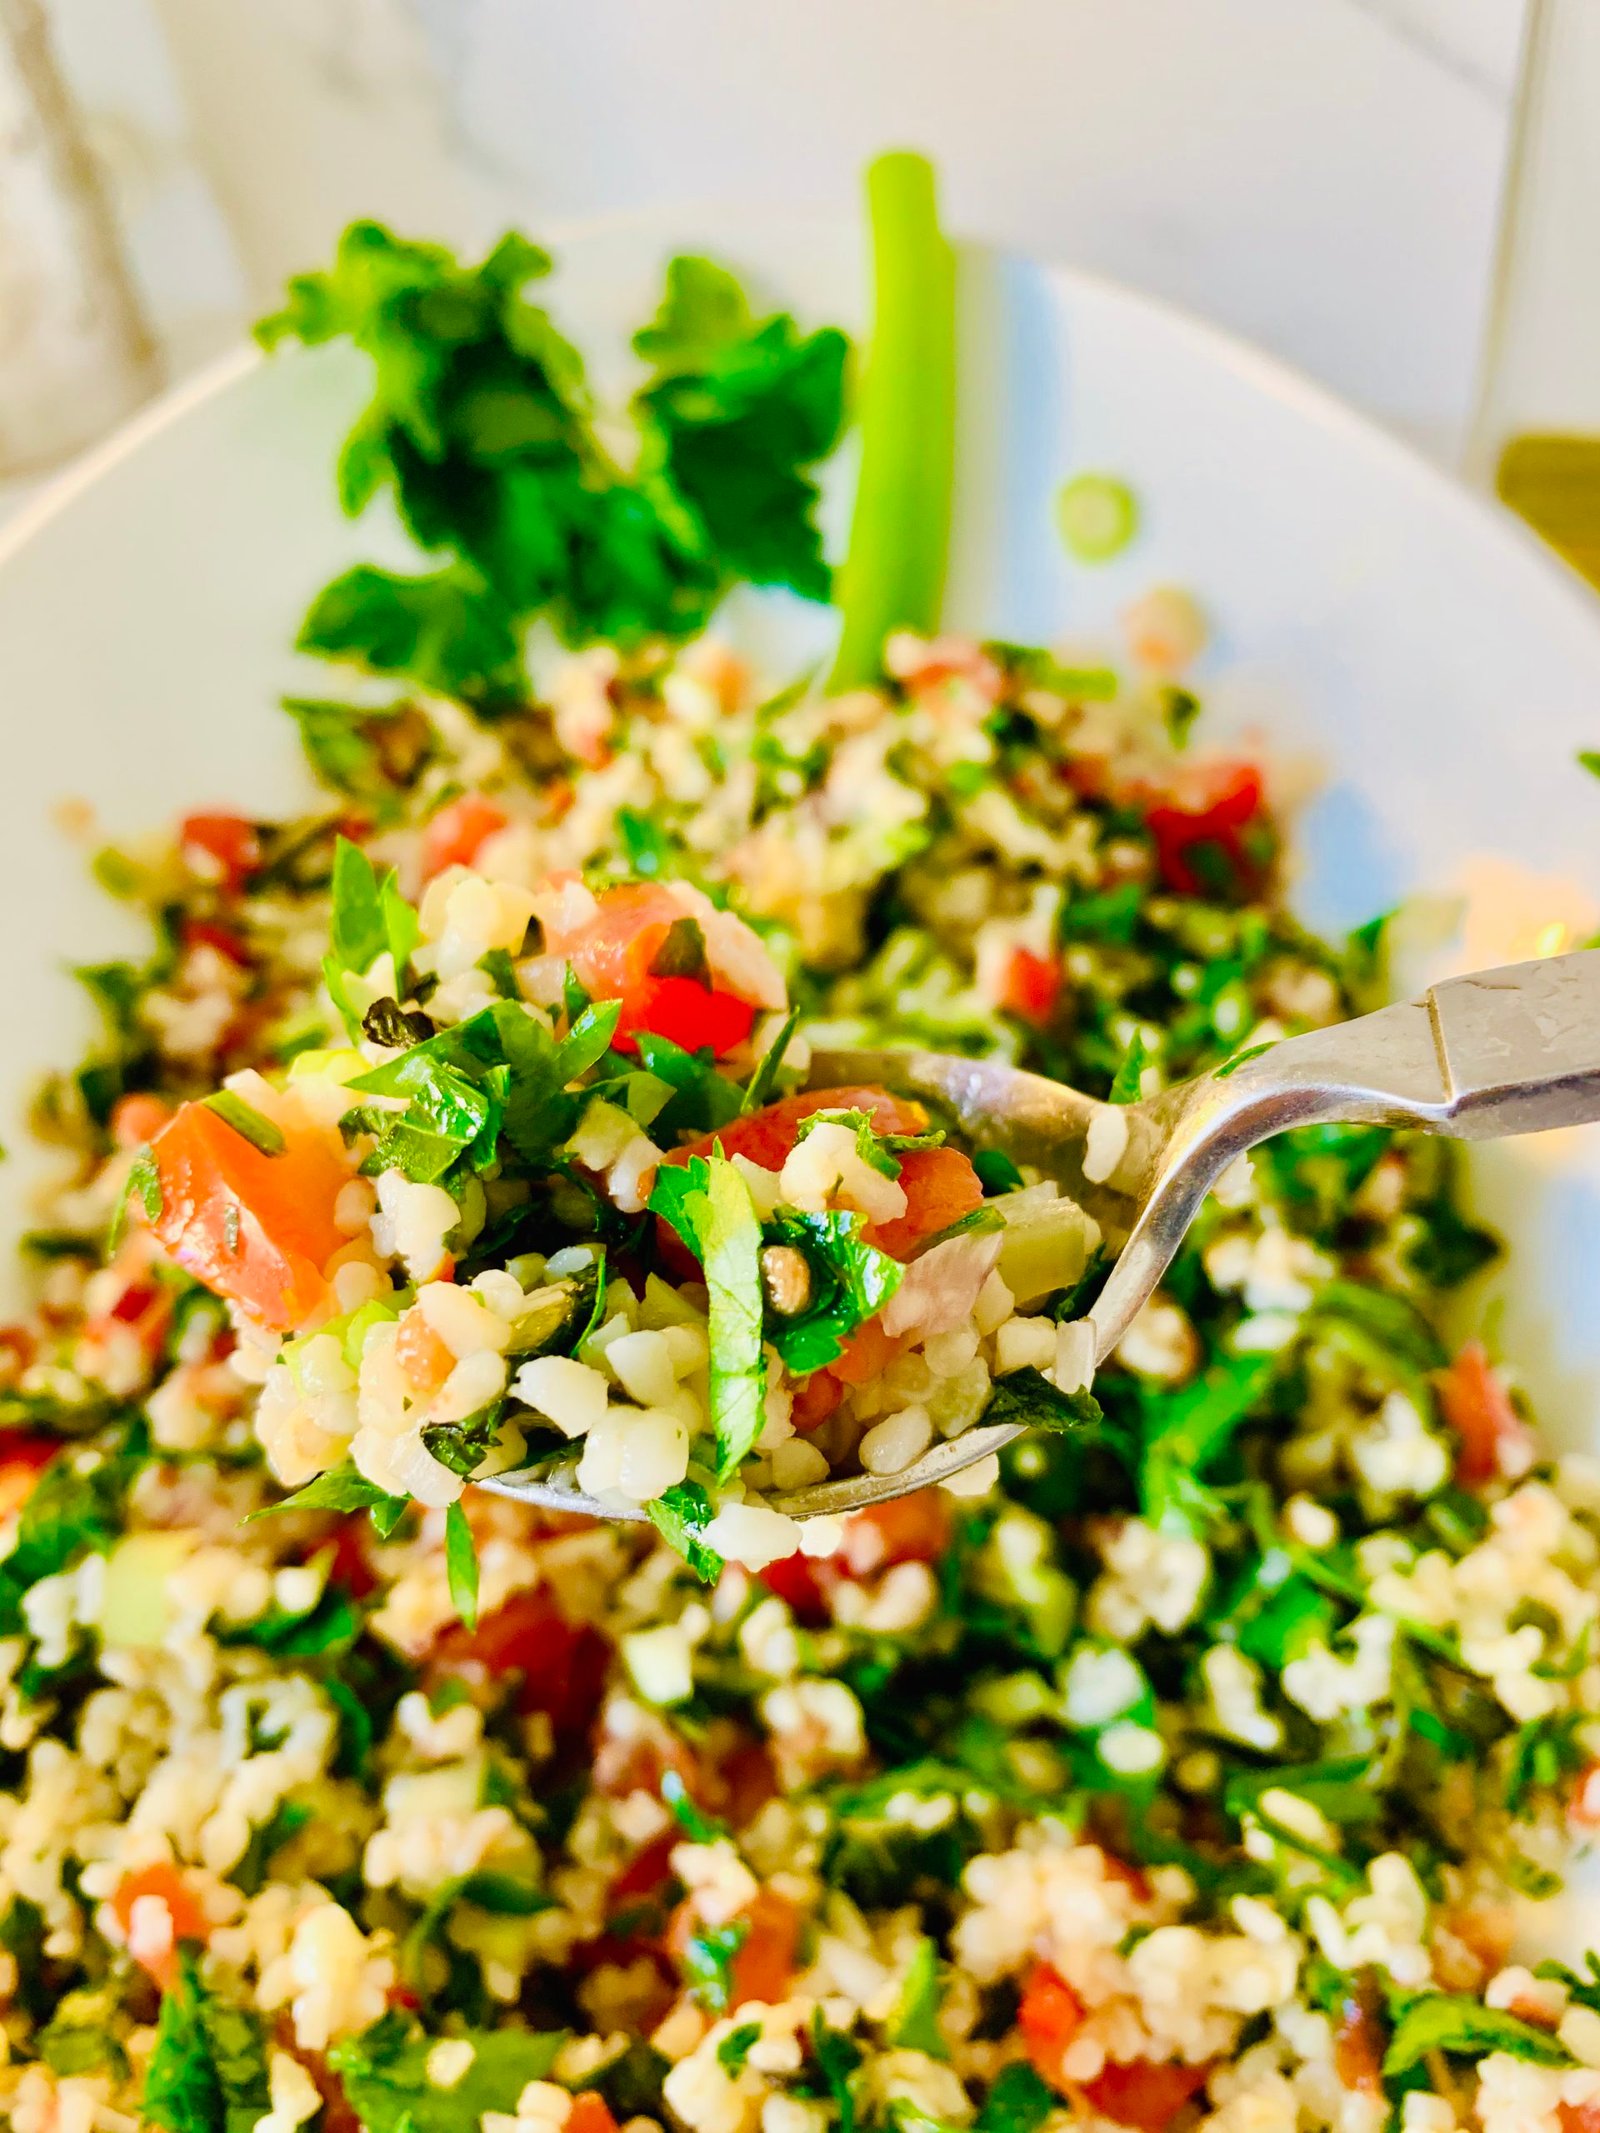 Delicious recipe of the tabbouleh